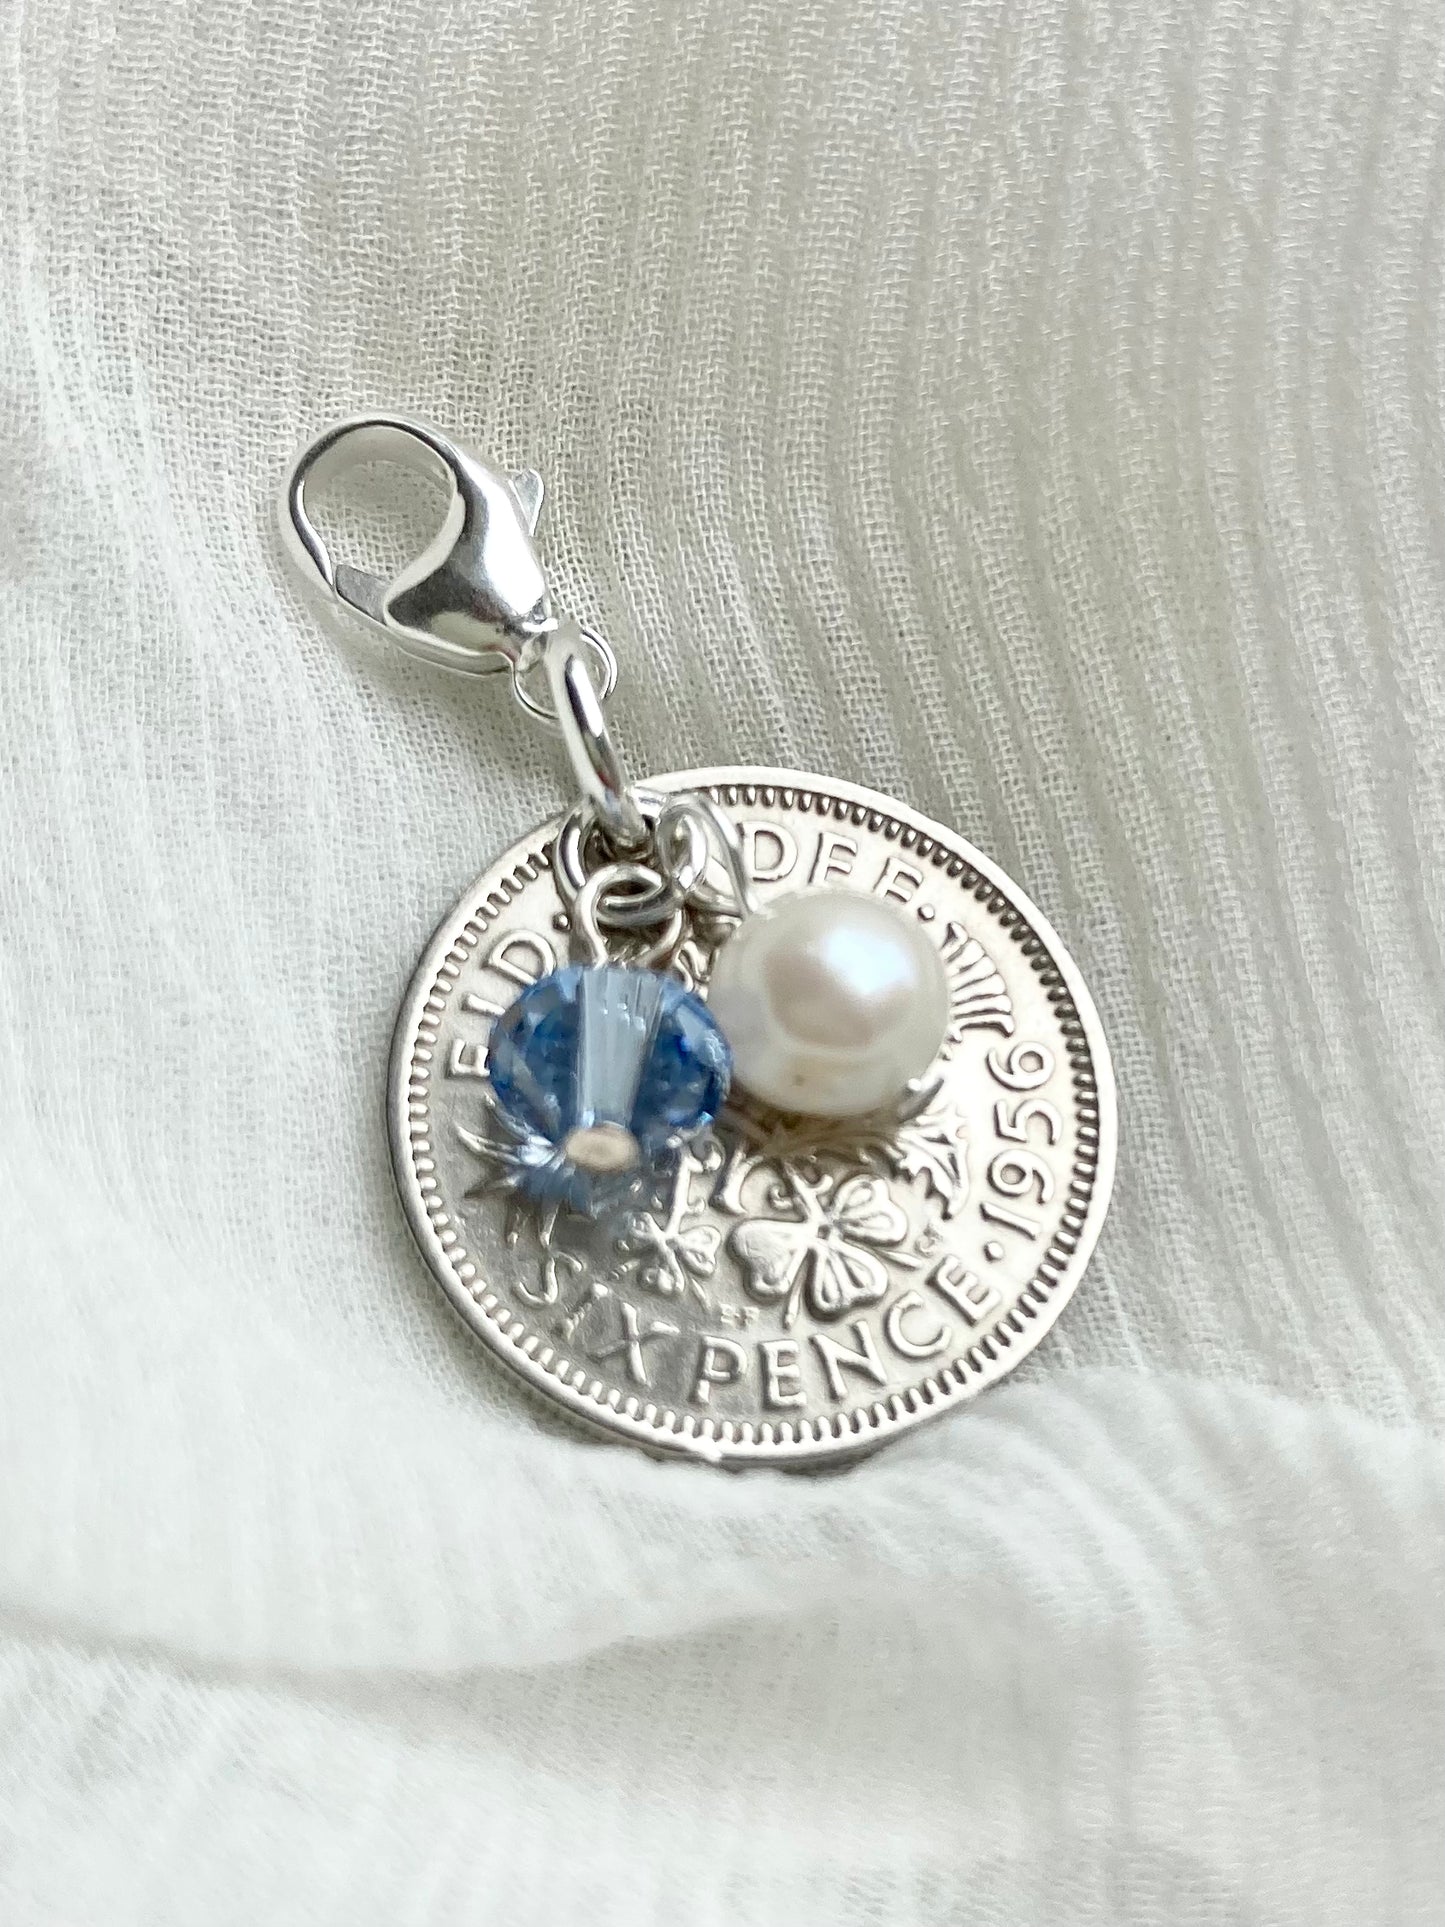 Something Old to Blue- Silver Sixpence Wedding Charm